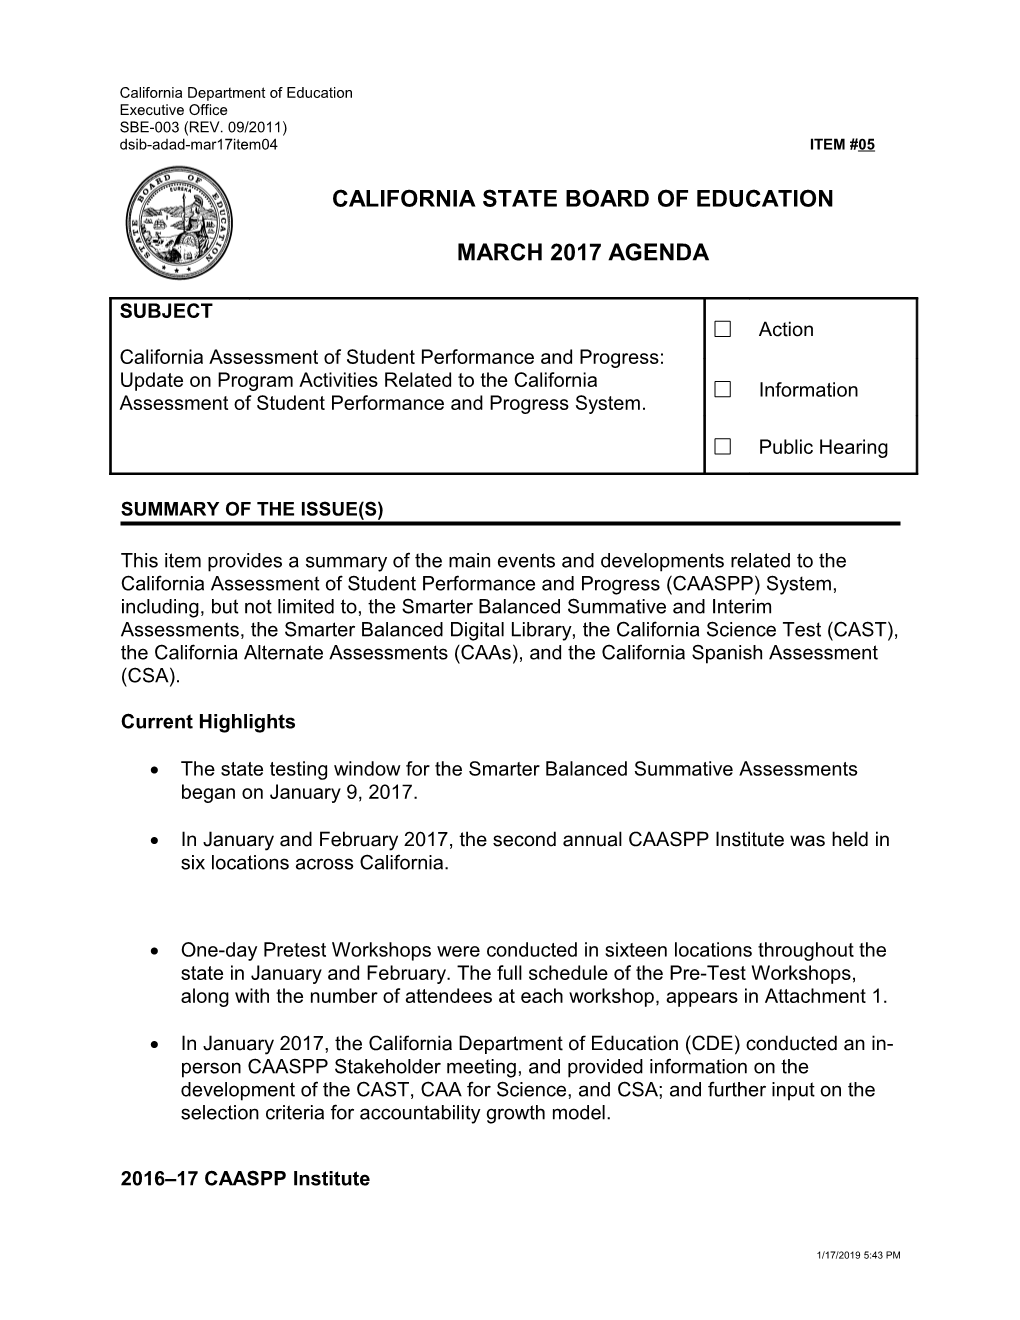 March 2017 Agenda Item 05 - Meeting Agendas (CA State Board of Education)